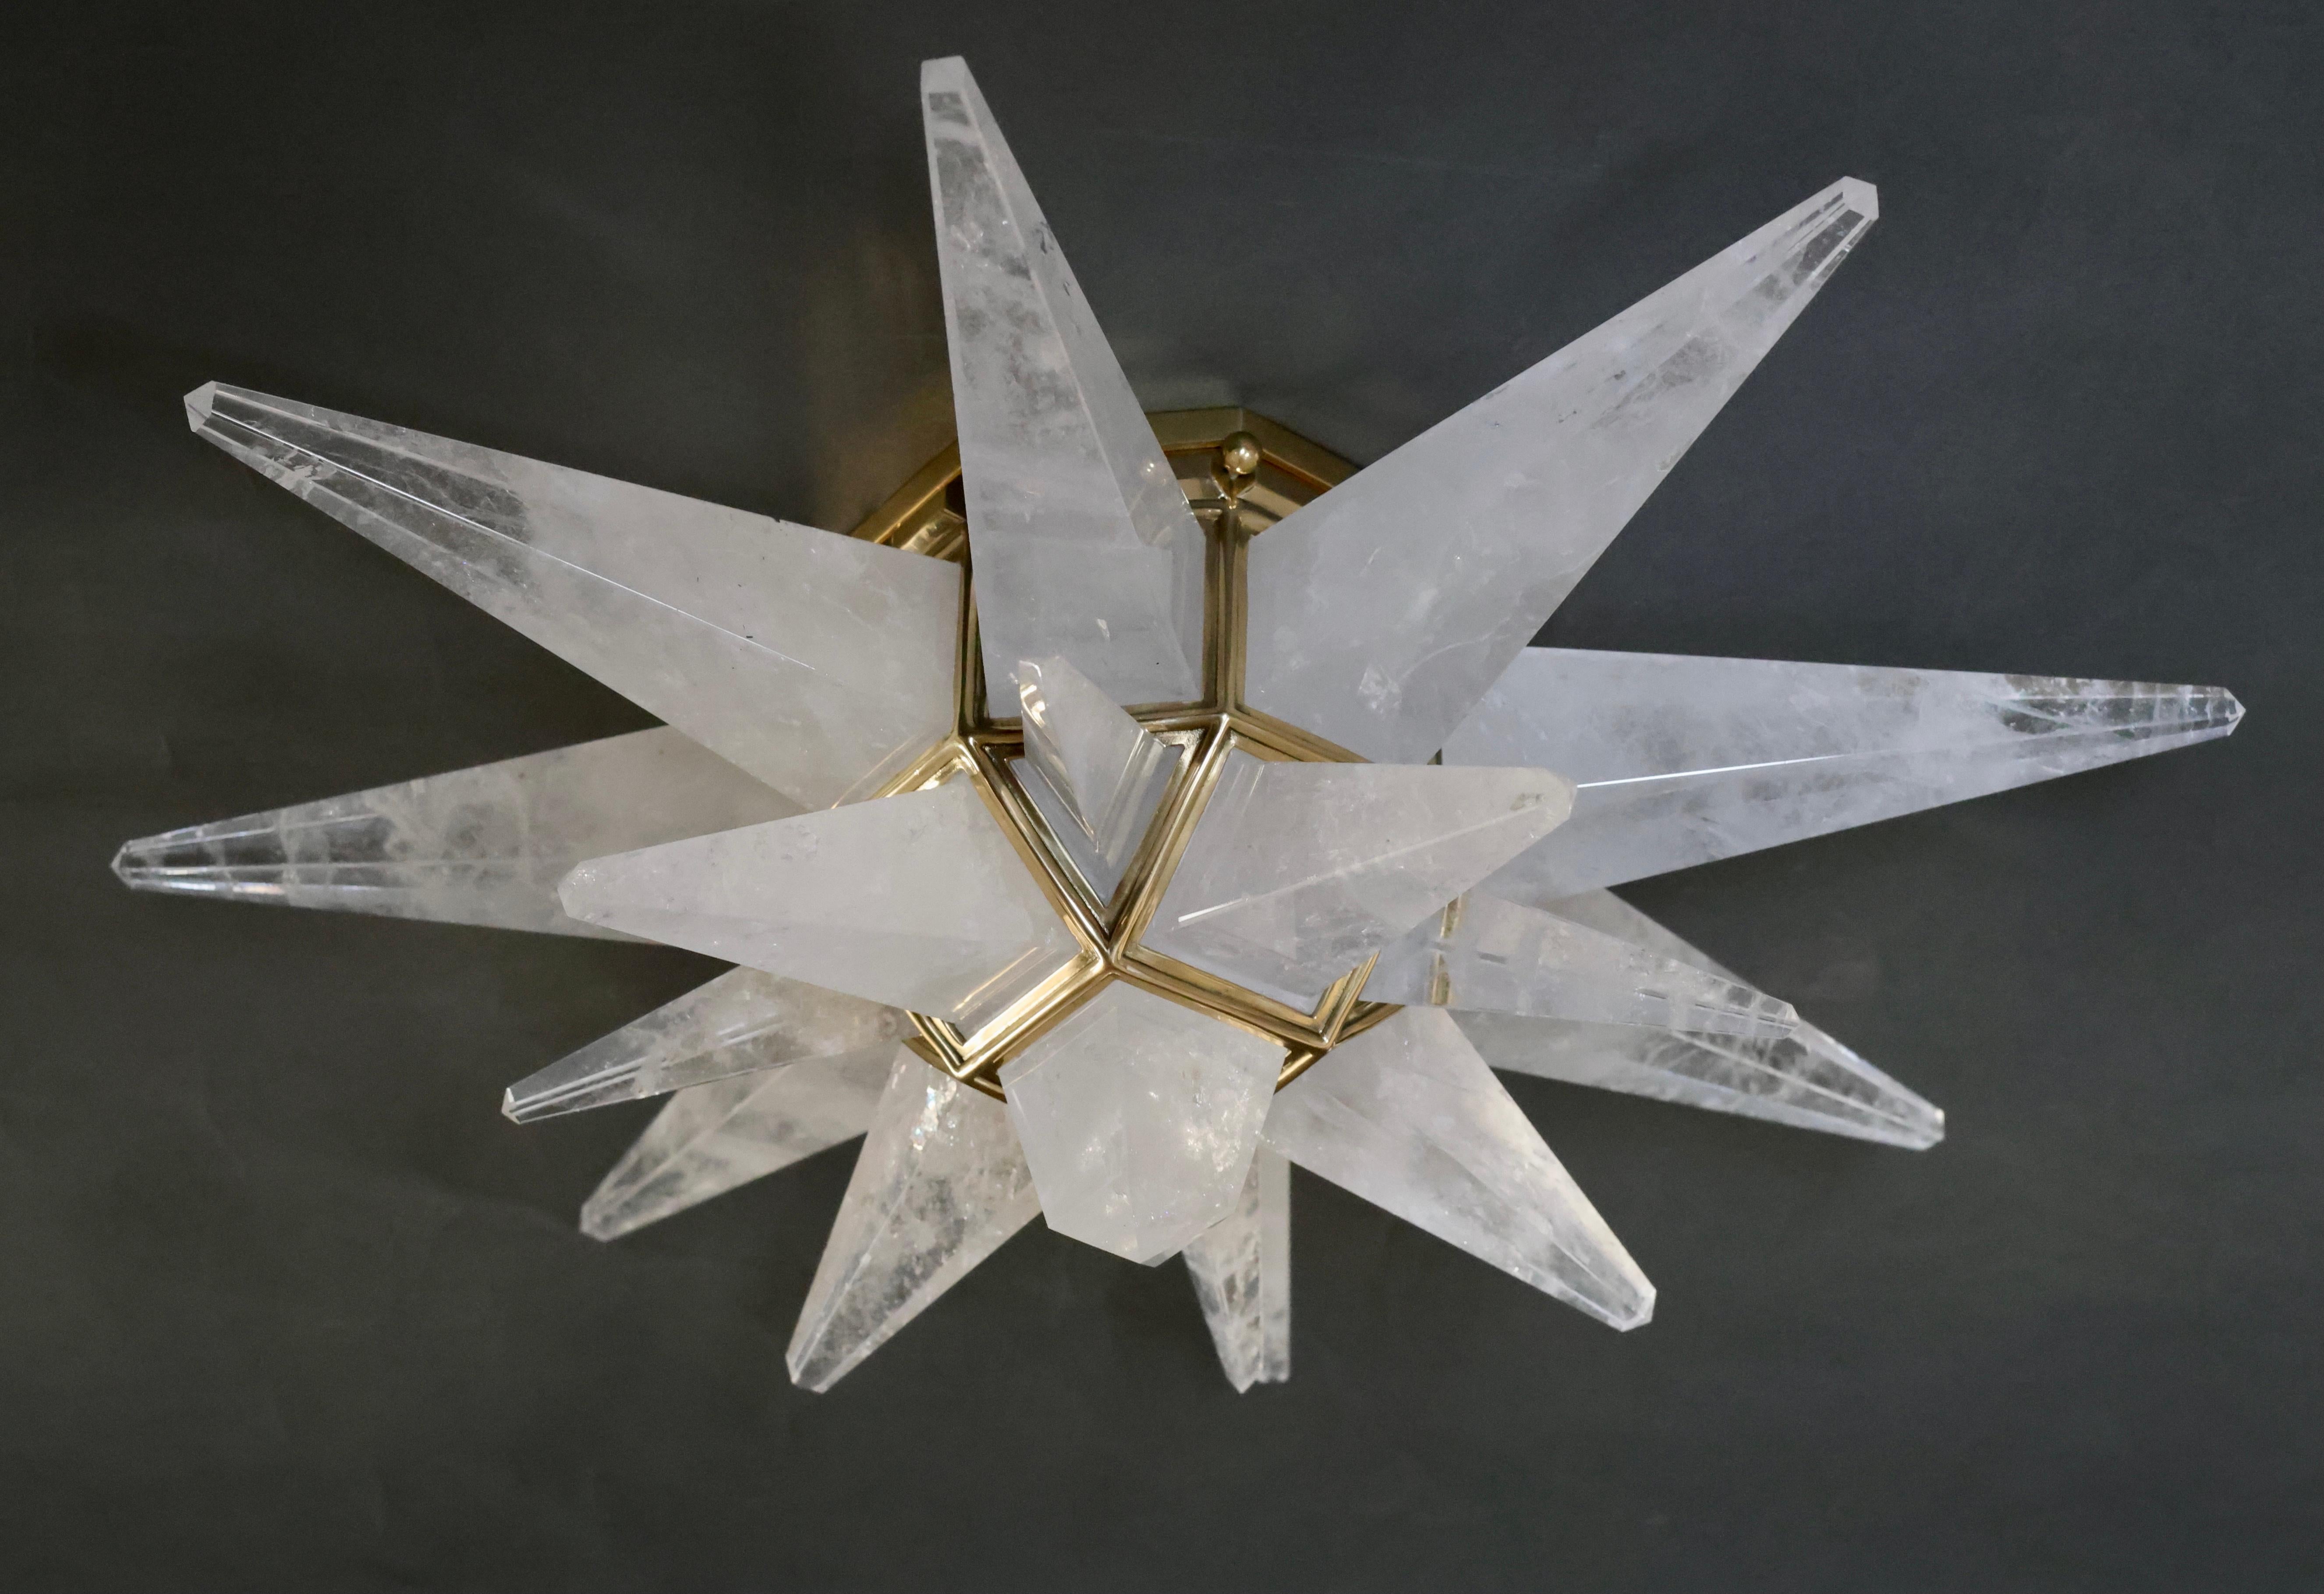 Star form rock crystal flush mount with polish brass frame.
Each fixture installed two sockets. Crated by Phoenix gallery.